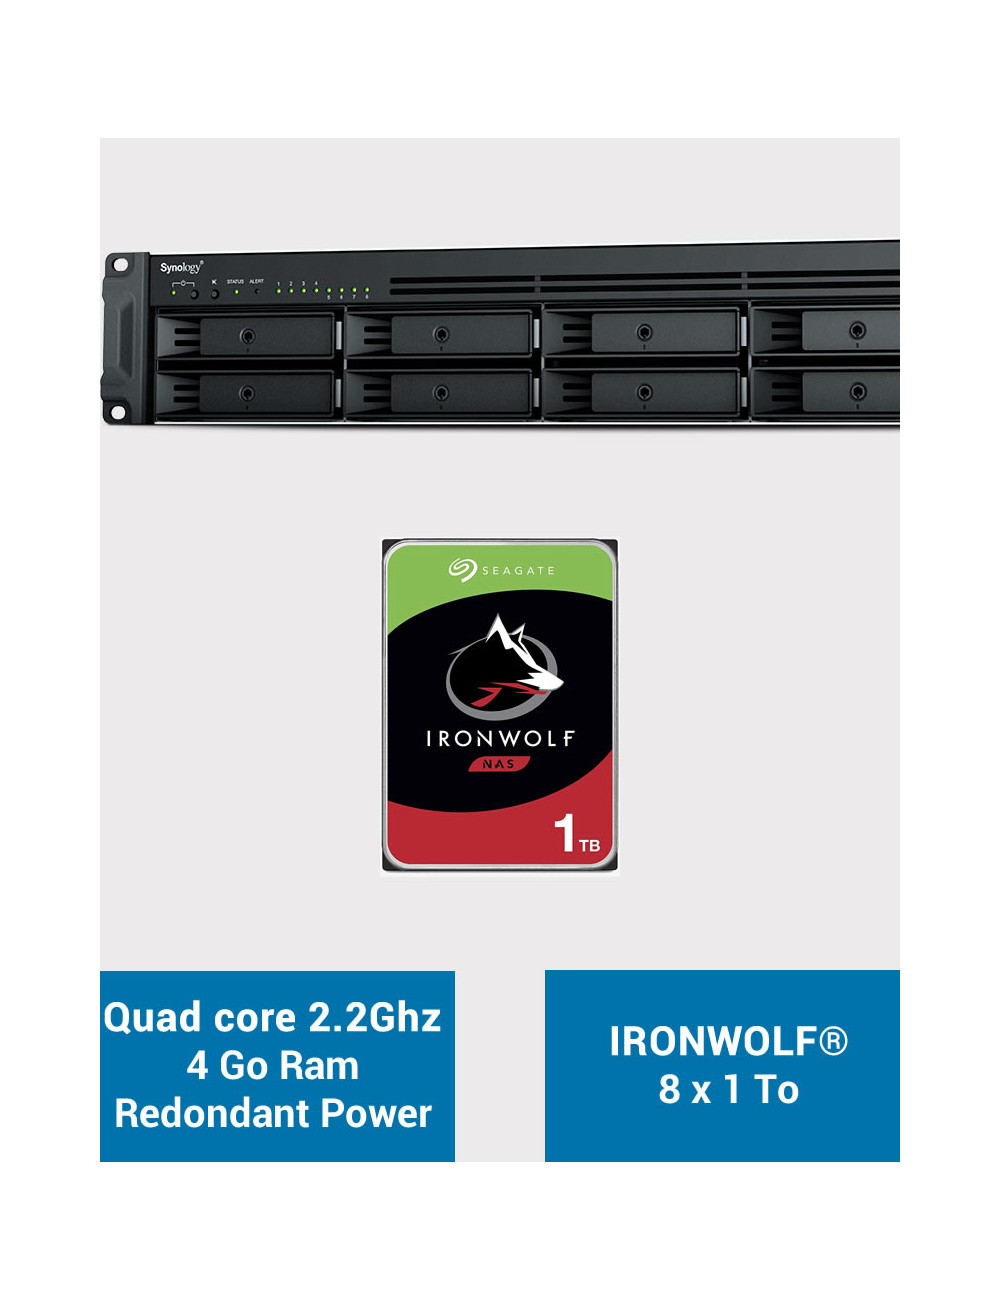 Synology RS1221RP+ Serveur NAS Rack (2 PSU) IRONWOLF 8To (8x1To)